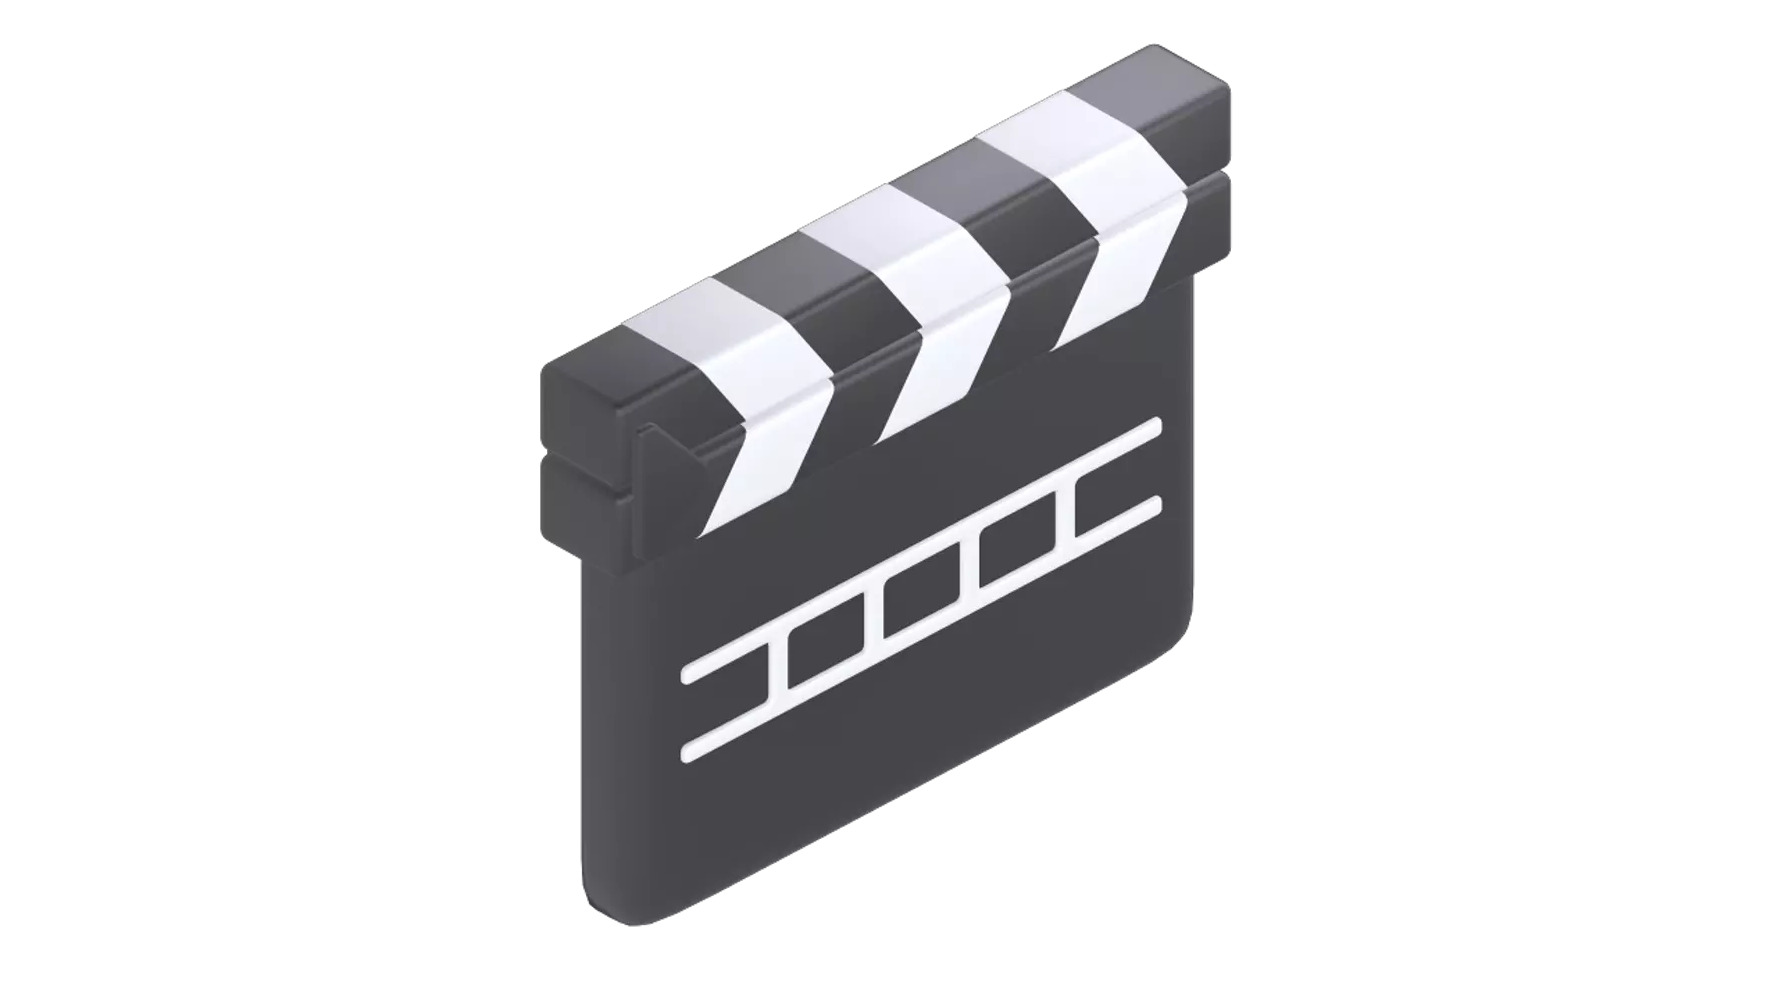 Movie Clapperboard 3D Graphic